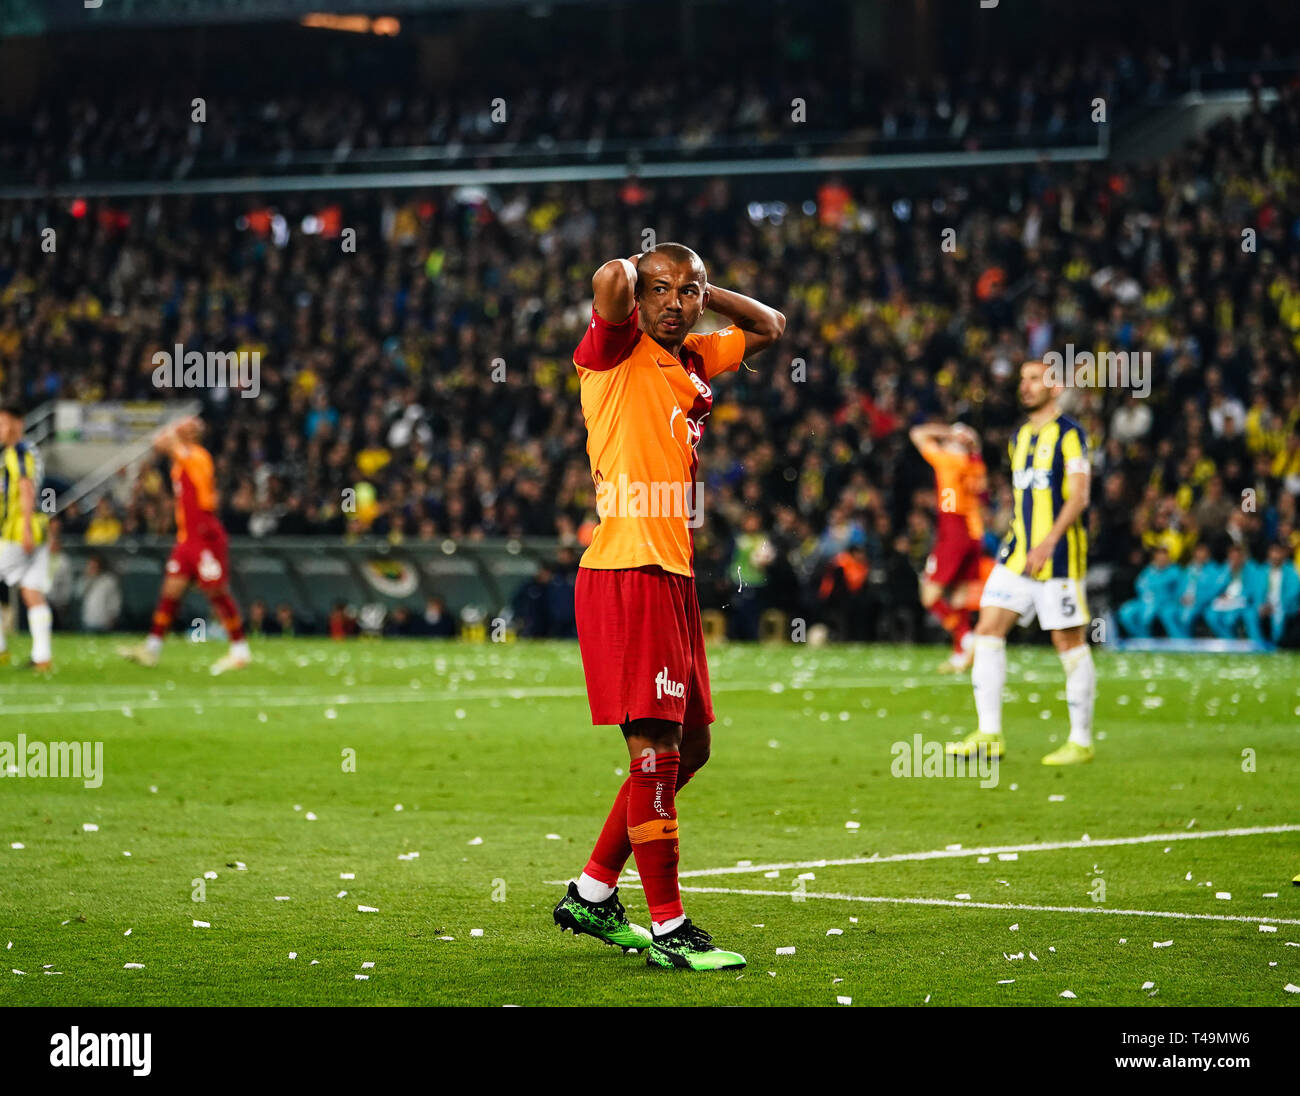 Istanbul Turkey 14th Apr 2019 Mariano Of Galatasaray After Missing A Big Chance During The Turkish Super Lig Match Between Fenerbache And Galatasaray At The Aza Kra SaracoaÃ¿lu Stadium In Istanbul Turkey Ulrik